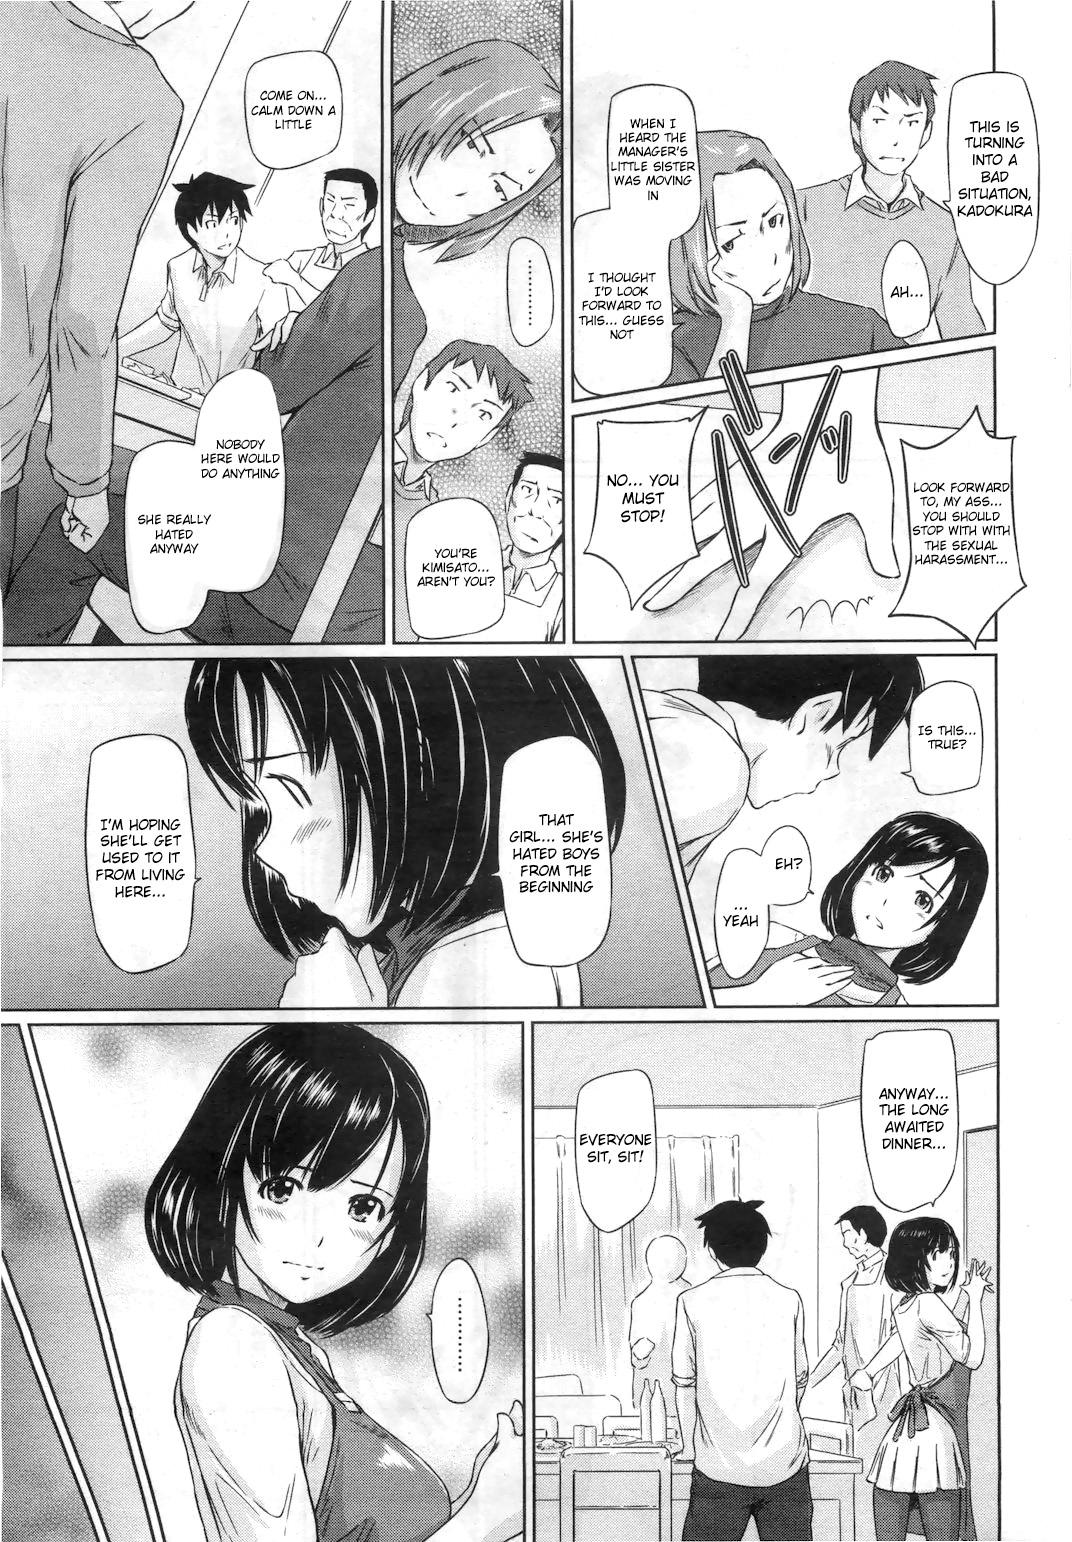 Lesbian Sex Welcome to Tokoharusou Chapter 1 Shaven - Page 7